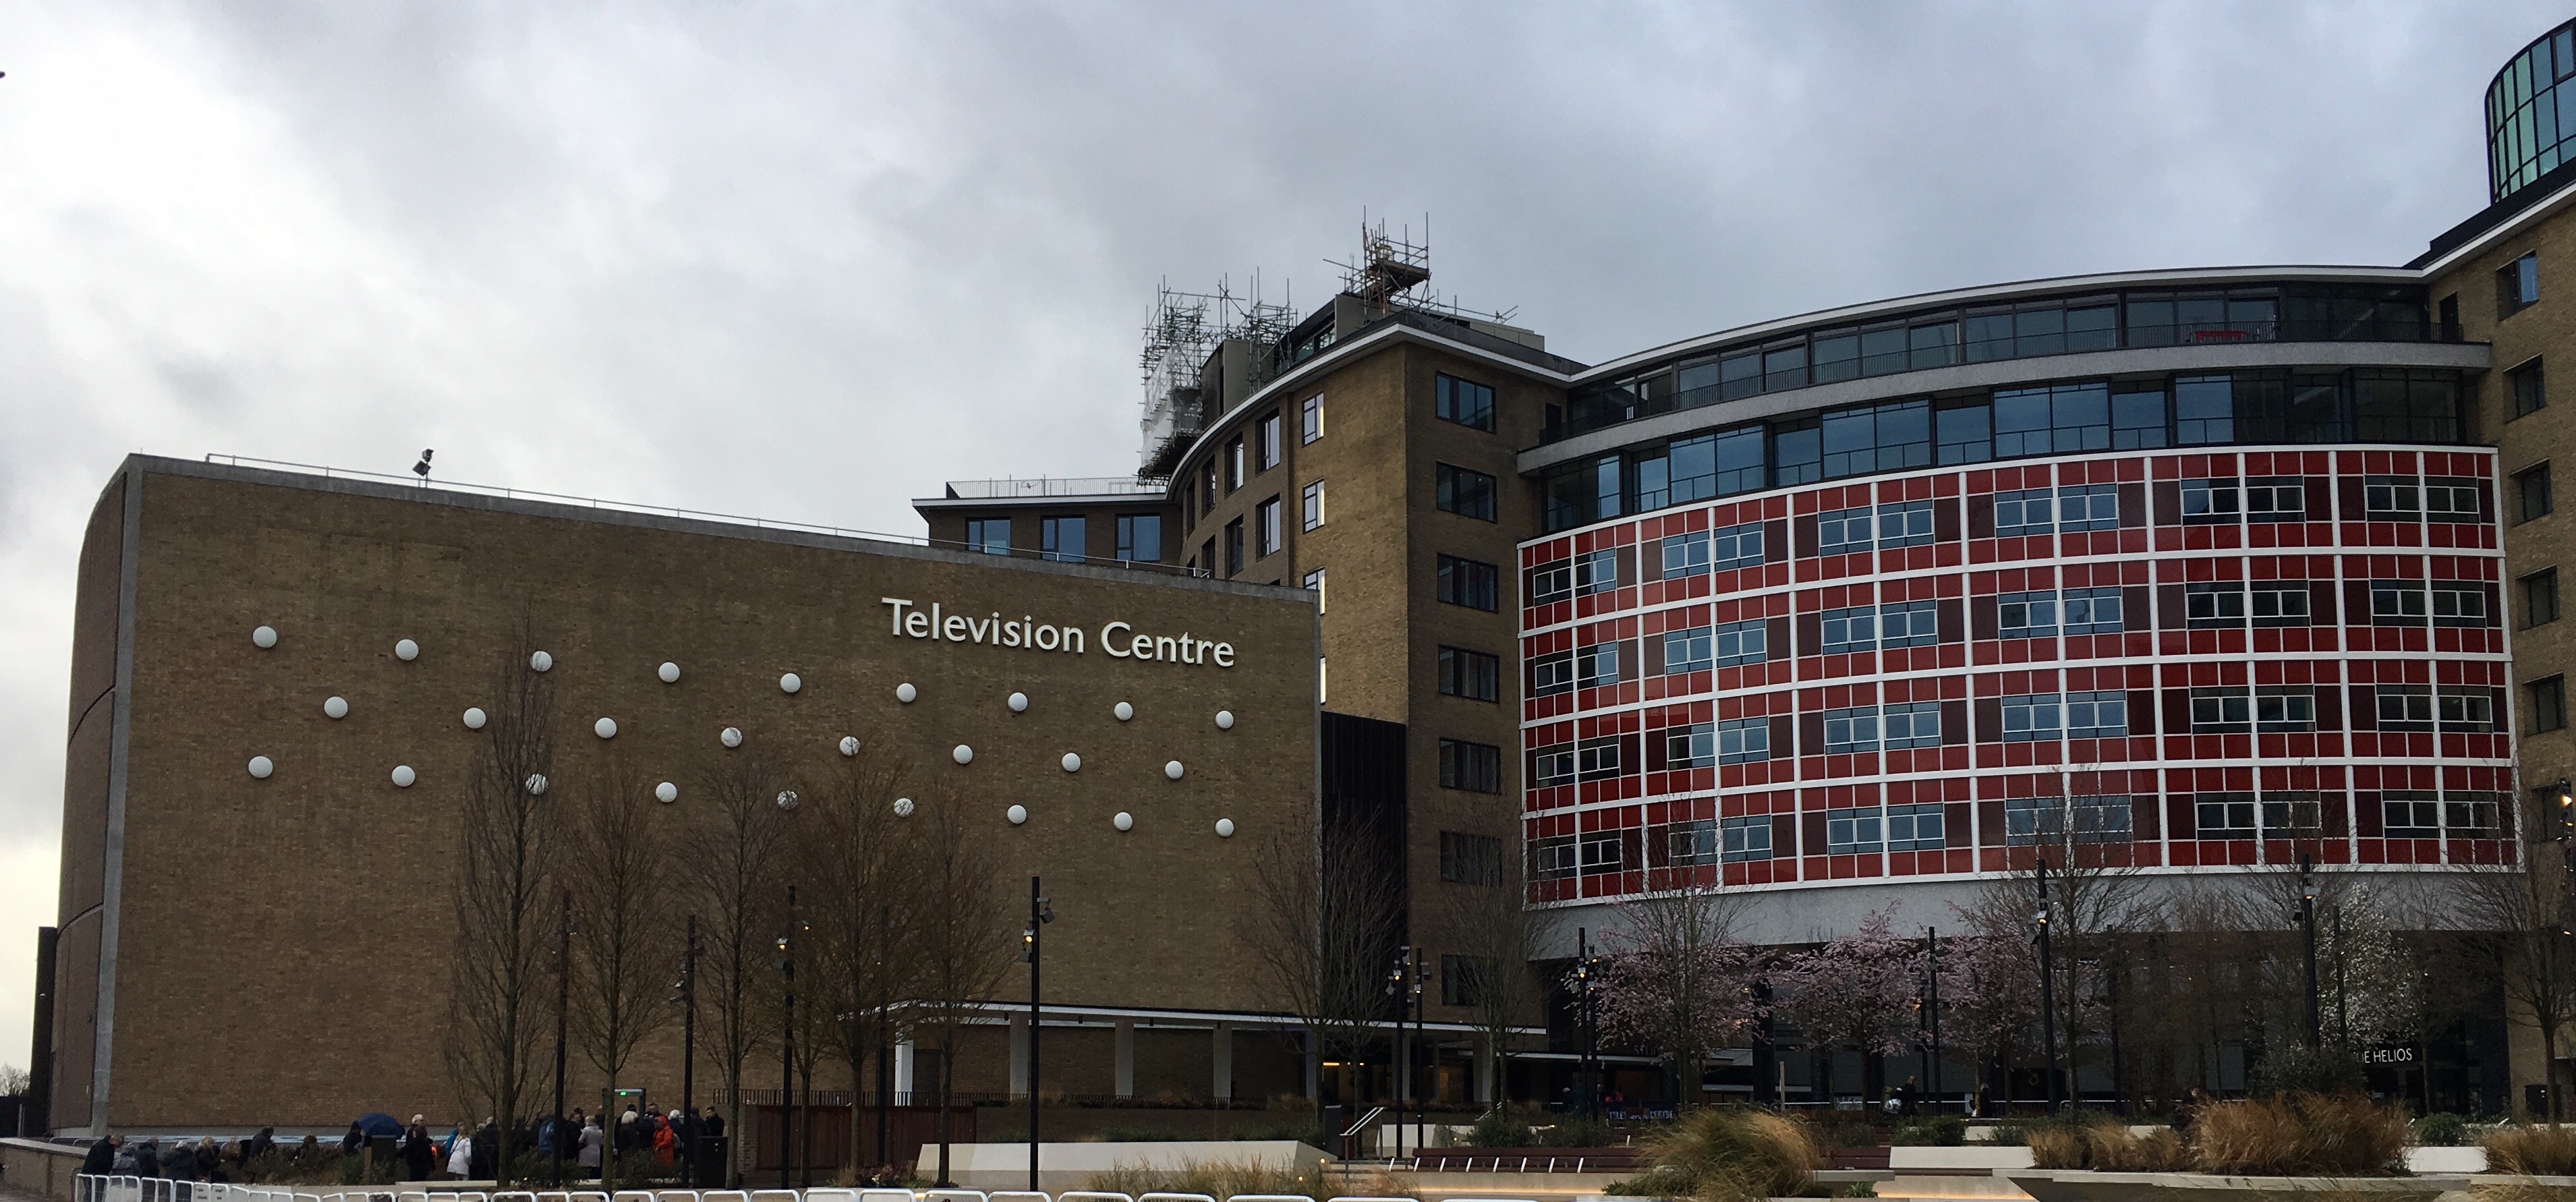 Television Centre | Neil Quigley